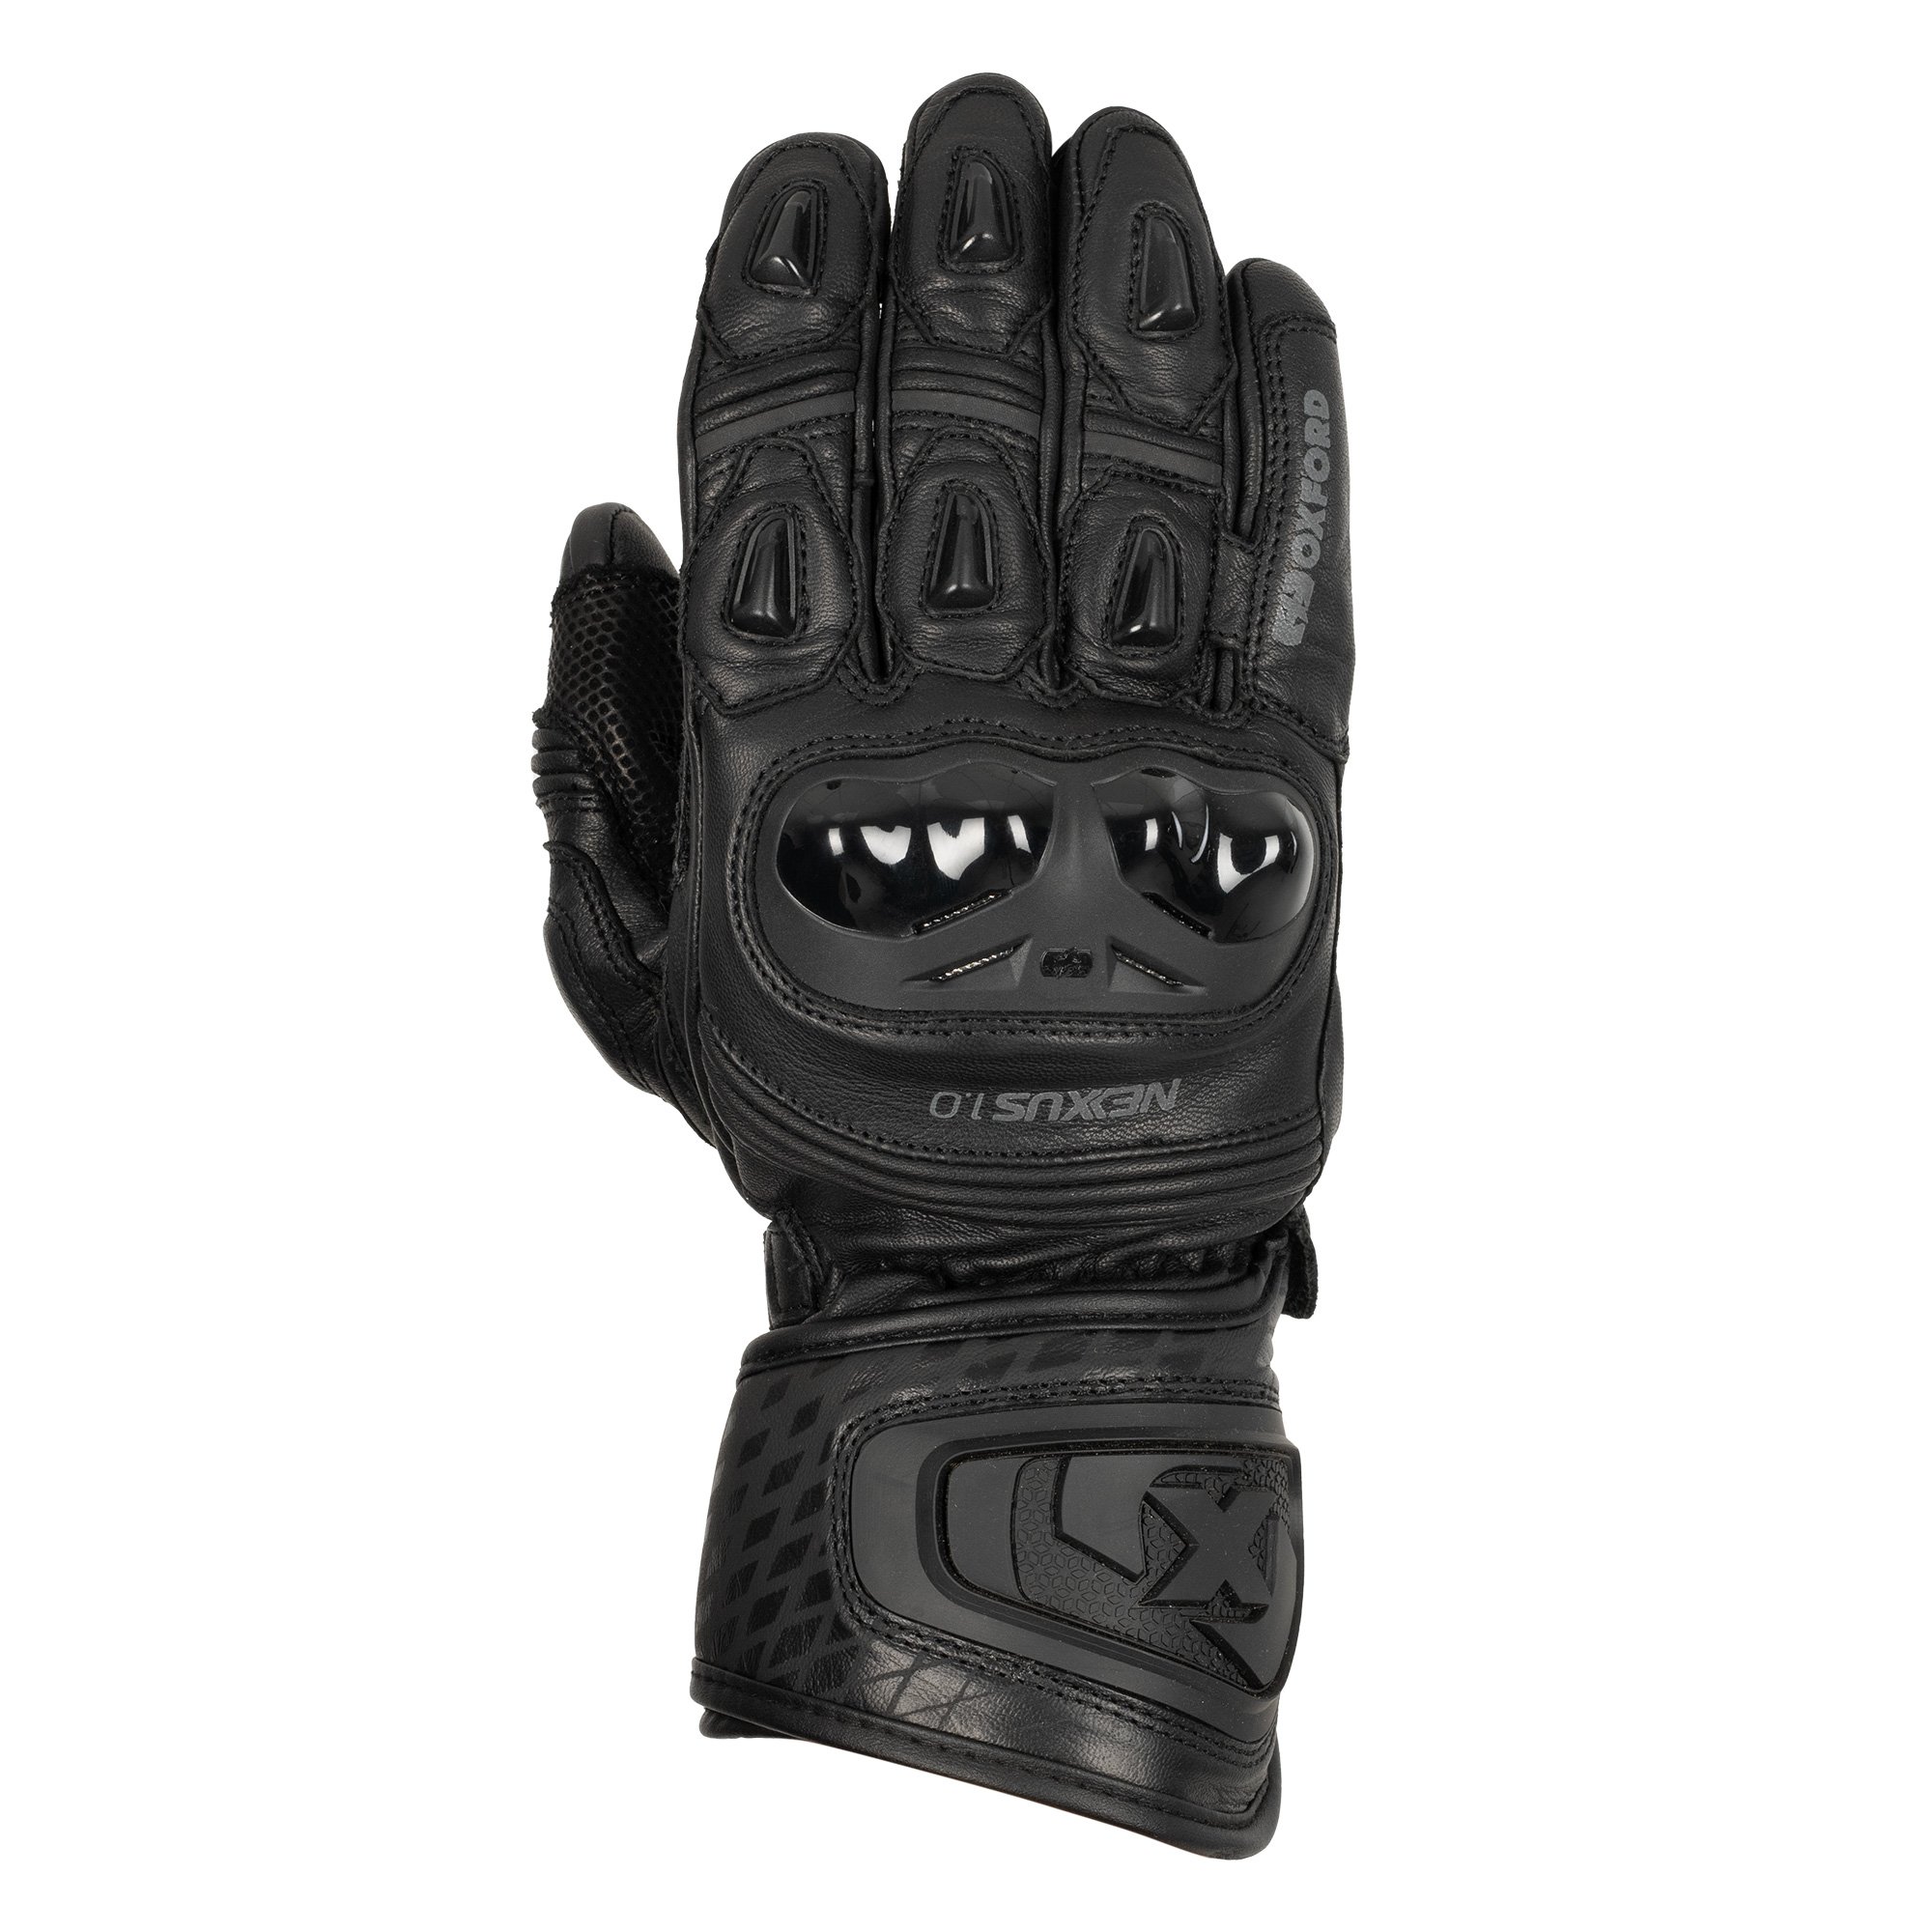 Oxford Nexus MS Glove Stealth Black : Oxford Products